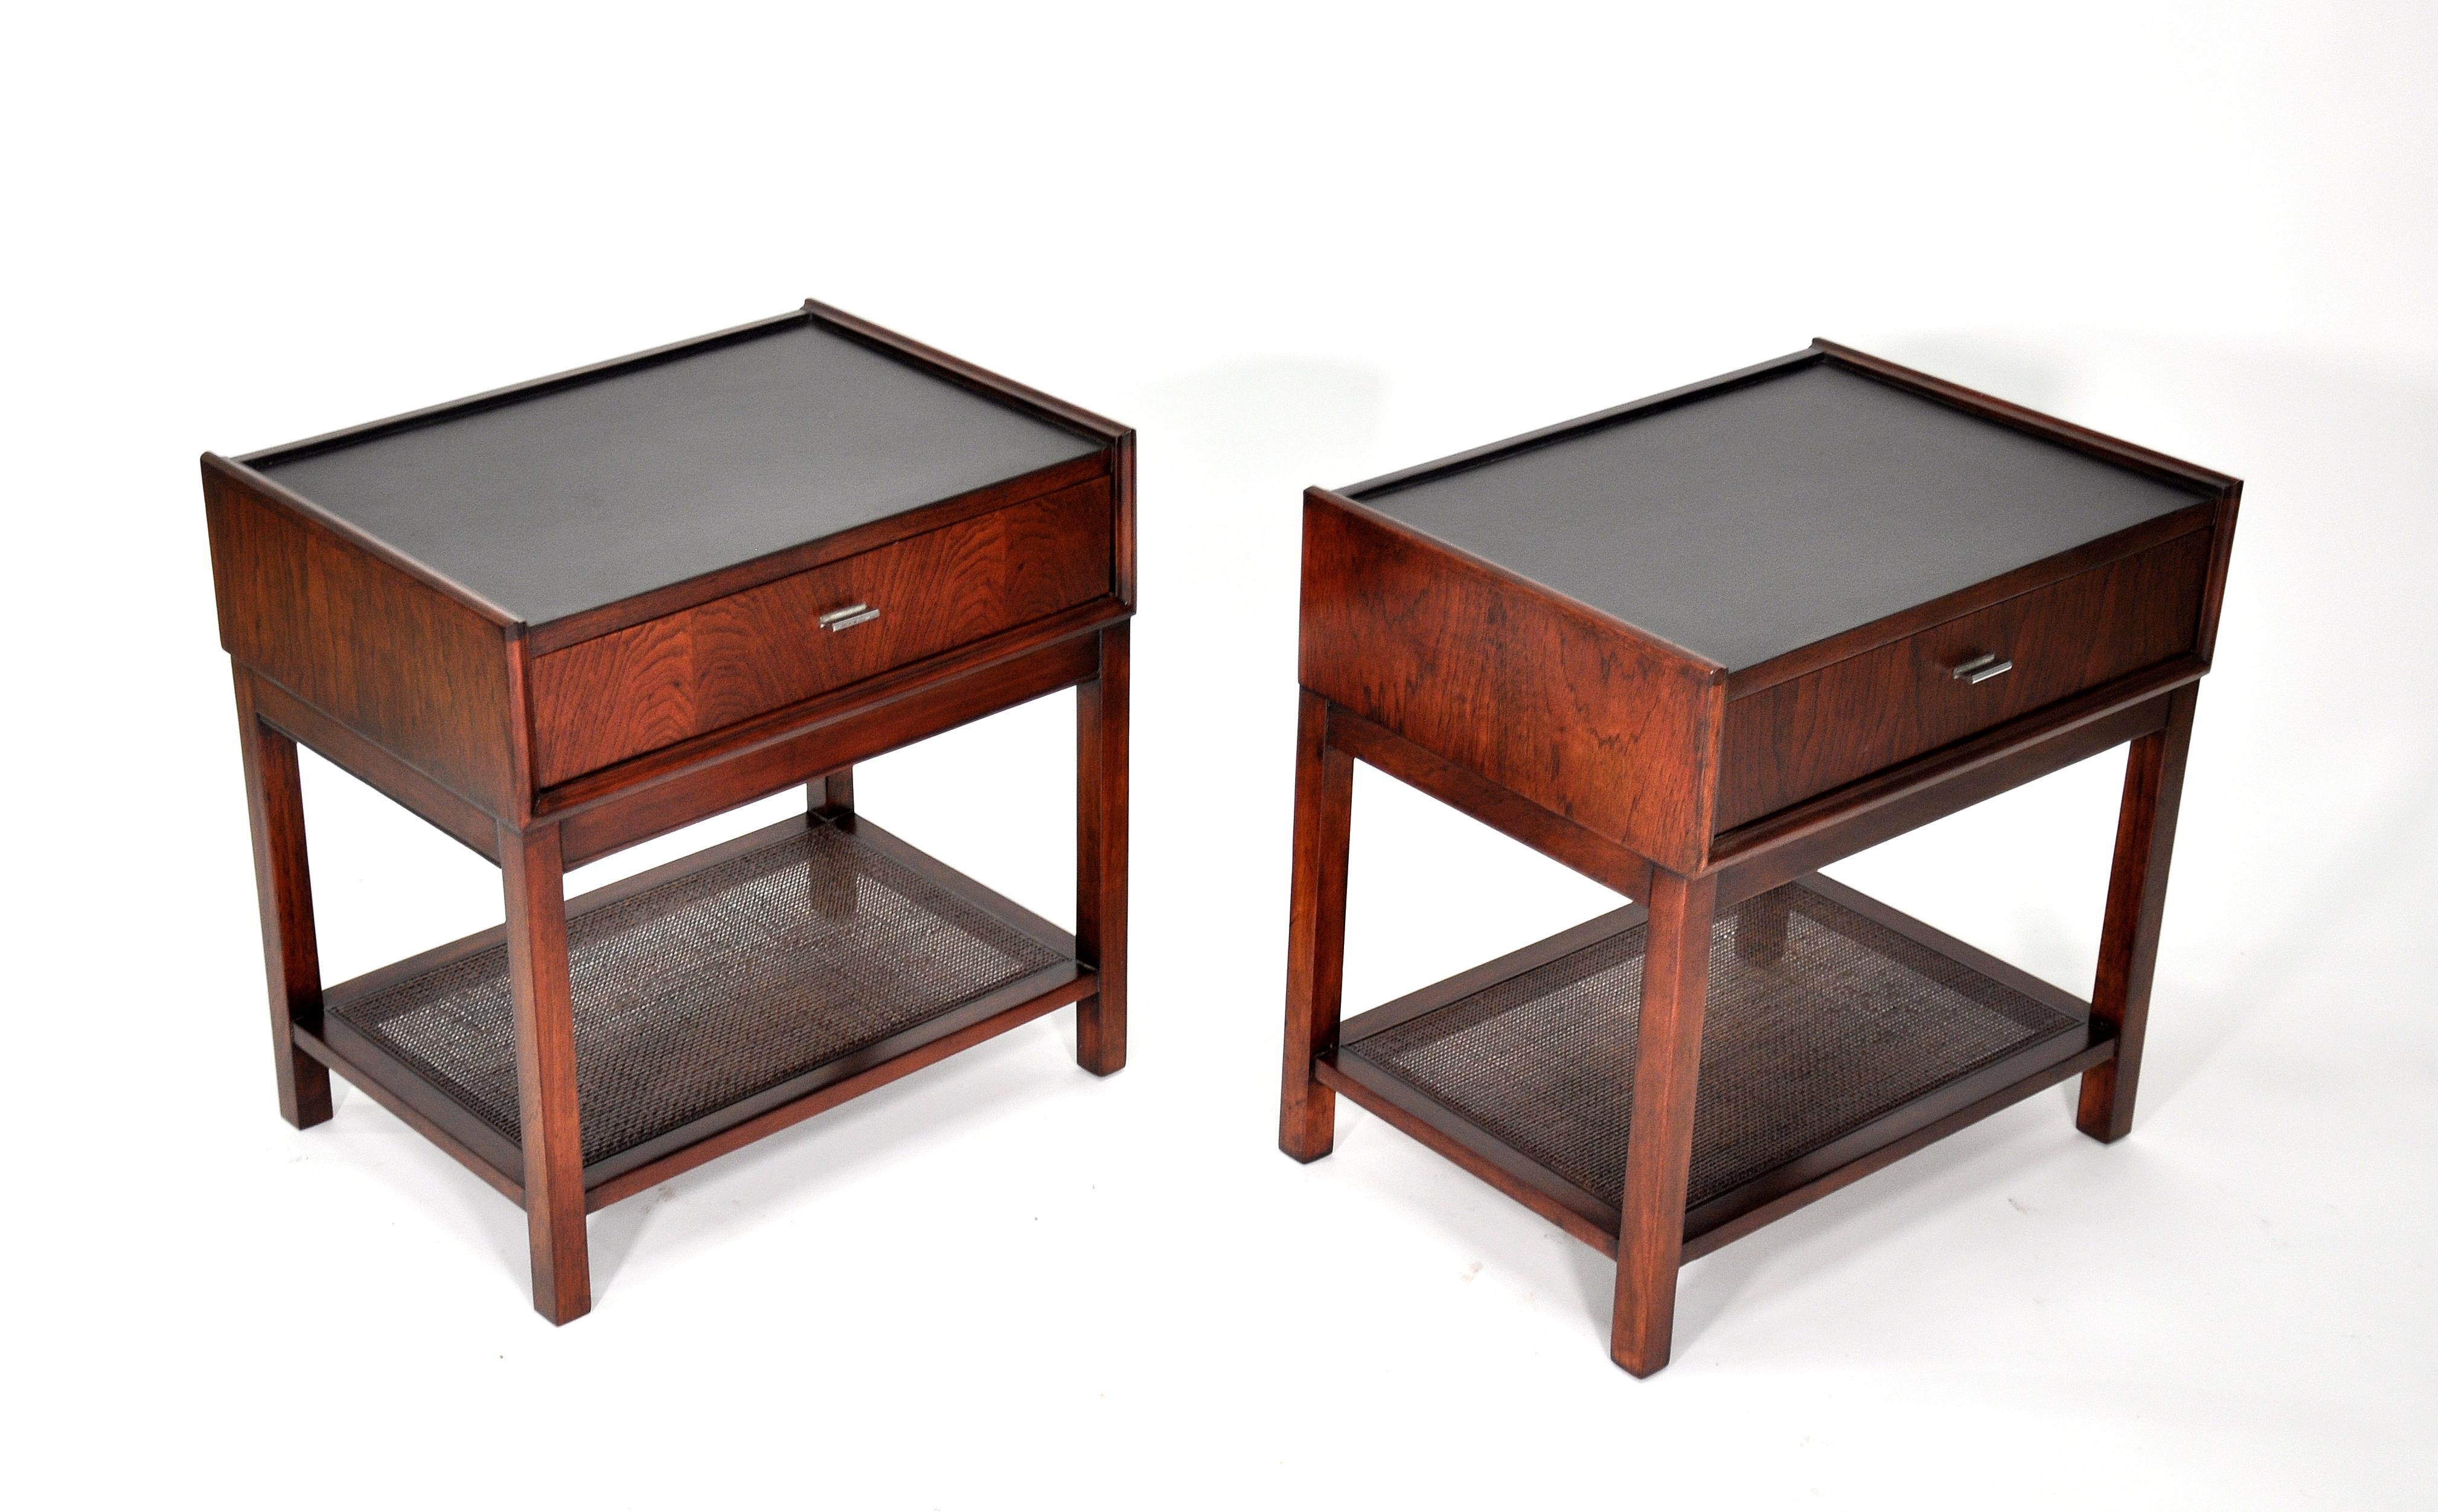 A gorgeous pair of vintage Mid-Century Modern two-tier rosewood side or end tables manufactured by Founders Furniture in the 1960s, often attributed to Harvey Probber. Two-tiered, fitted with a caned magazine shelf and a black leather top; the